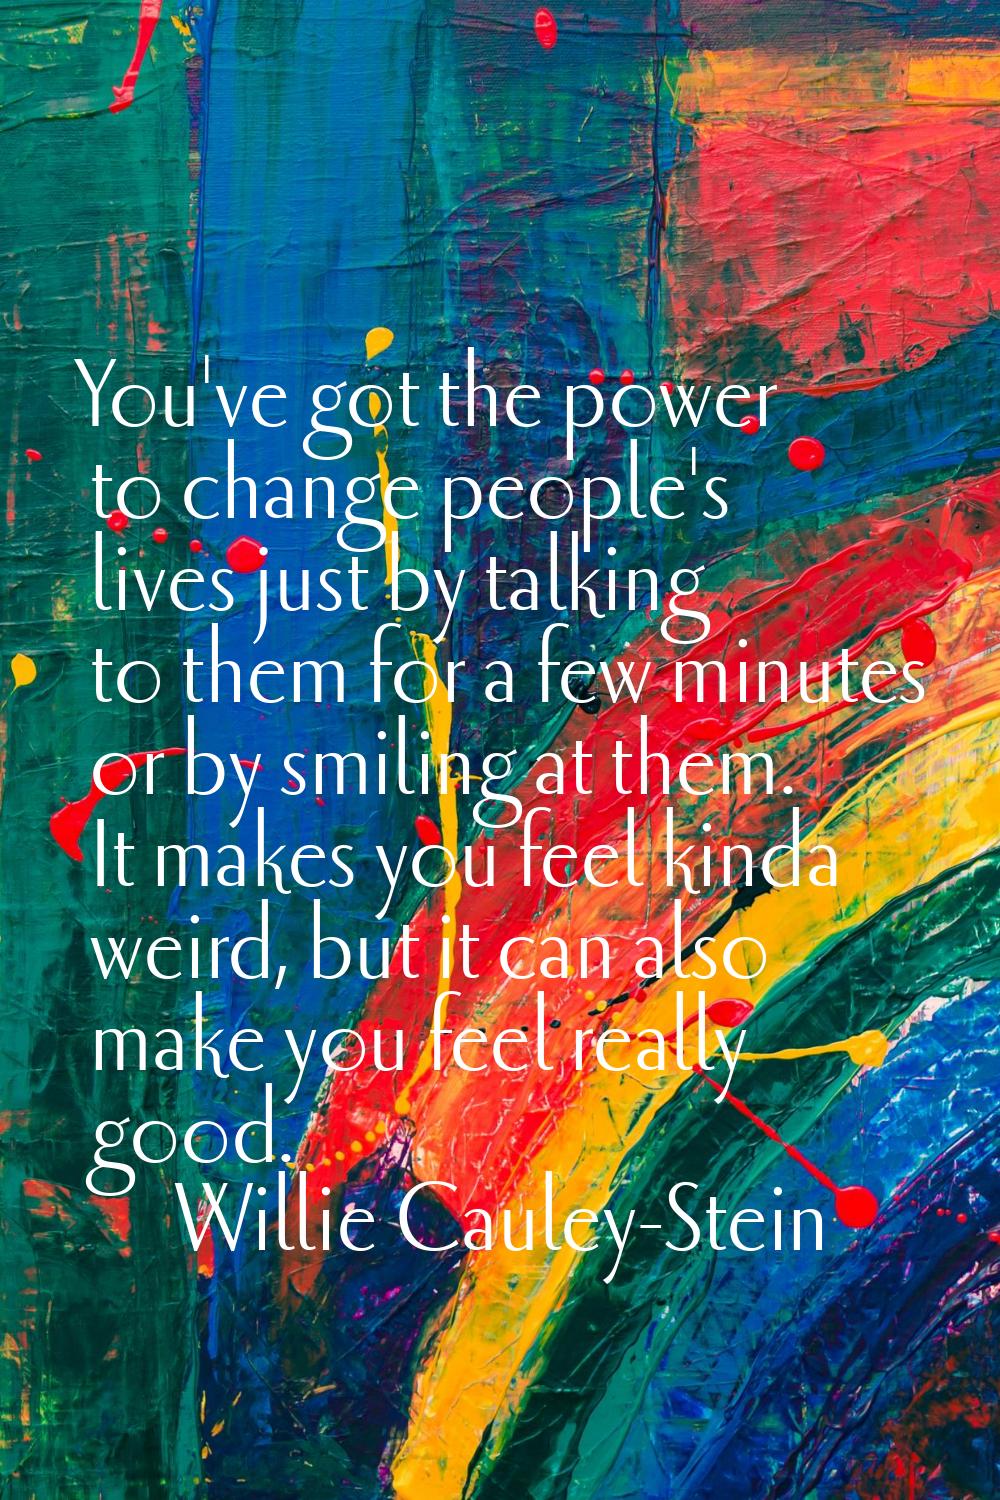 You've got the power to change people's lives just by talking to them for a few minutes or by smili